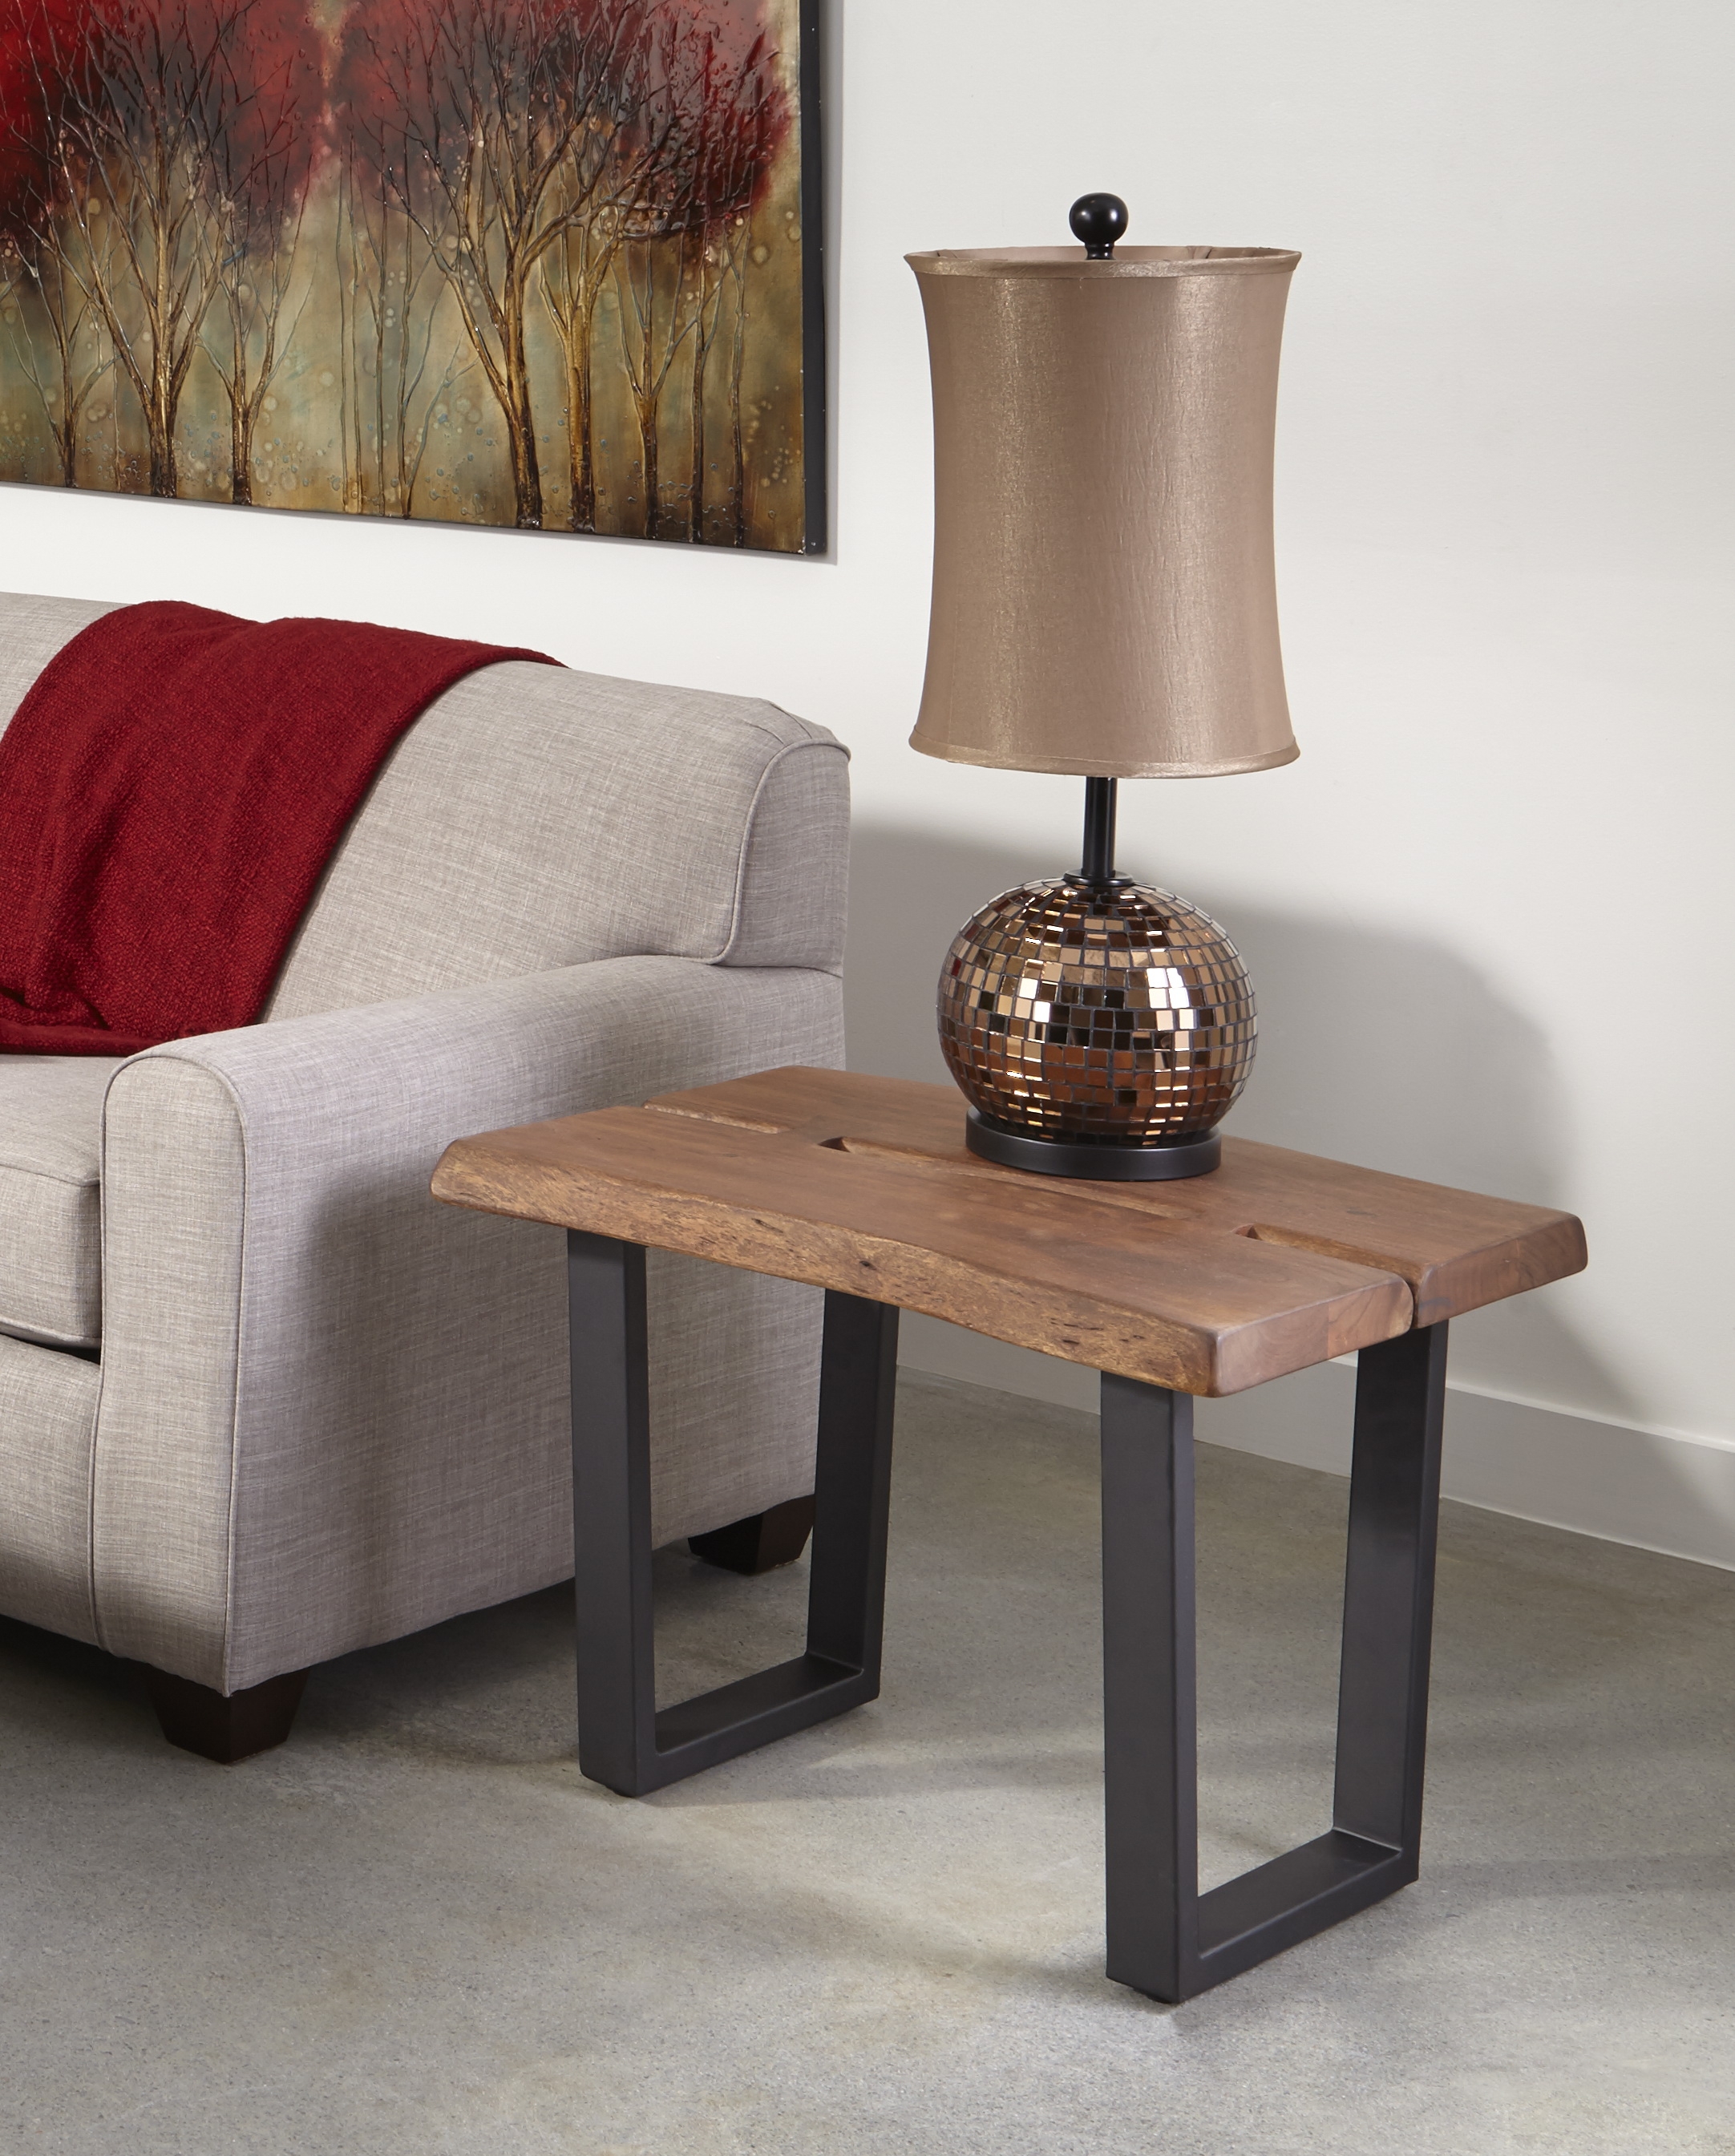 Sequoia End Table - 2 Cartons - Sequoia Light Brown - Image 2